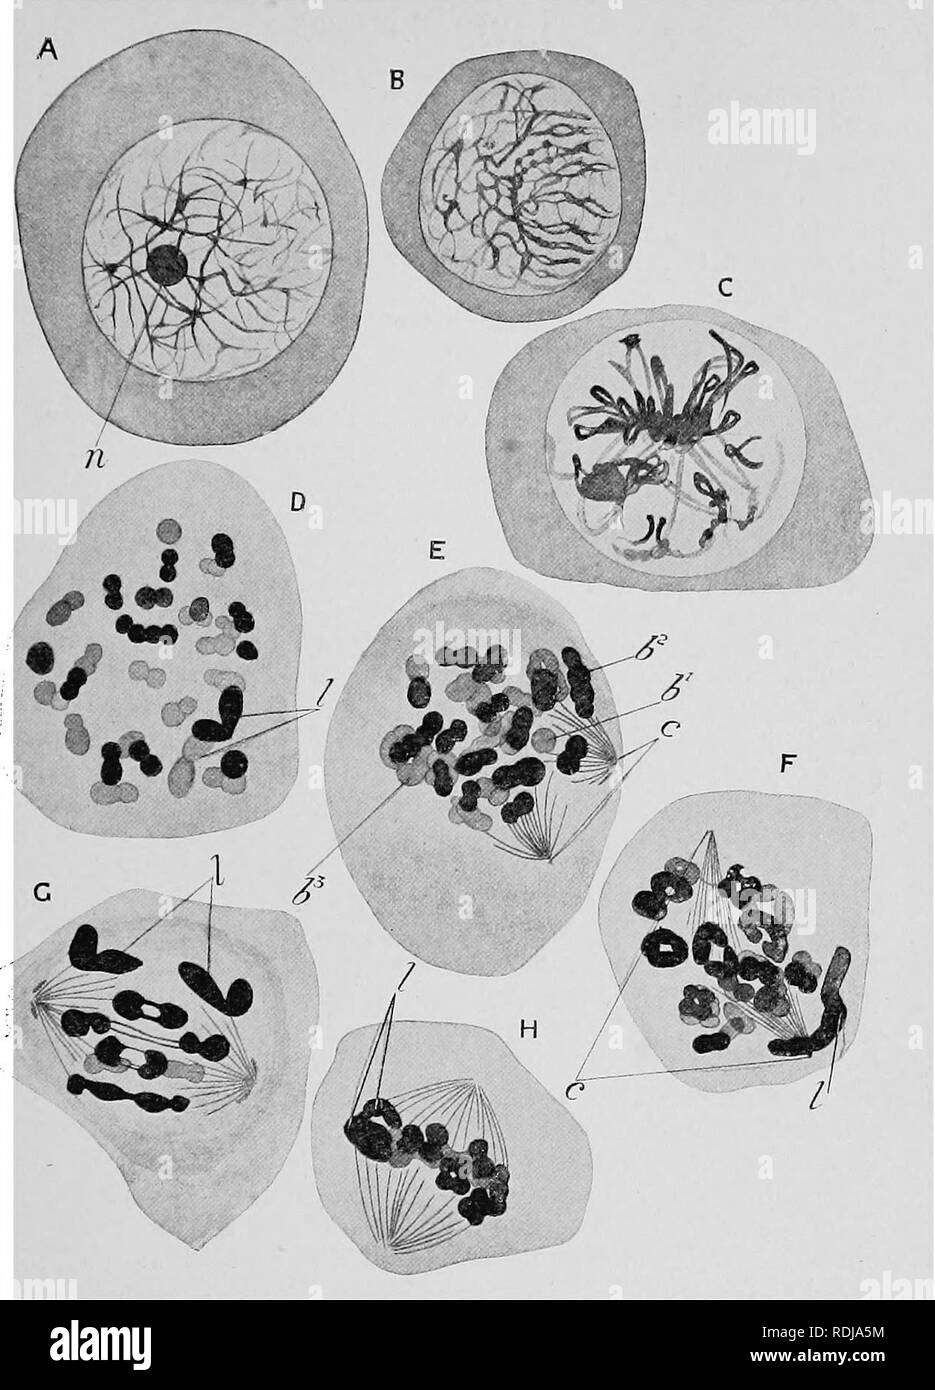 . Text-book of embryology. Embryology. Fig. 1.—Eight views of the maturation of the male cellg of Lepidosiren paradoxa. (After Agar.) A, leptonema stage. B, beginning of zygonema. C, strepsiuema stage, beginning of synizesis. D, separation of two chromosomes which were united in syndesis completed ; nuclear membrane dis- appeared. E, second pairing of chromosomes begun, appearance of centrosoraes for the first matura- tion spindle. F, later stage in second pairing of chromosomes, tlie centrosomes of the first spindle now situated at opposite poles of the nucleus. G, the anaphase of the first m Stock Photo